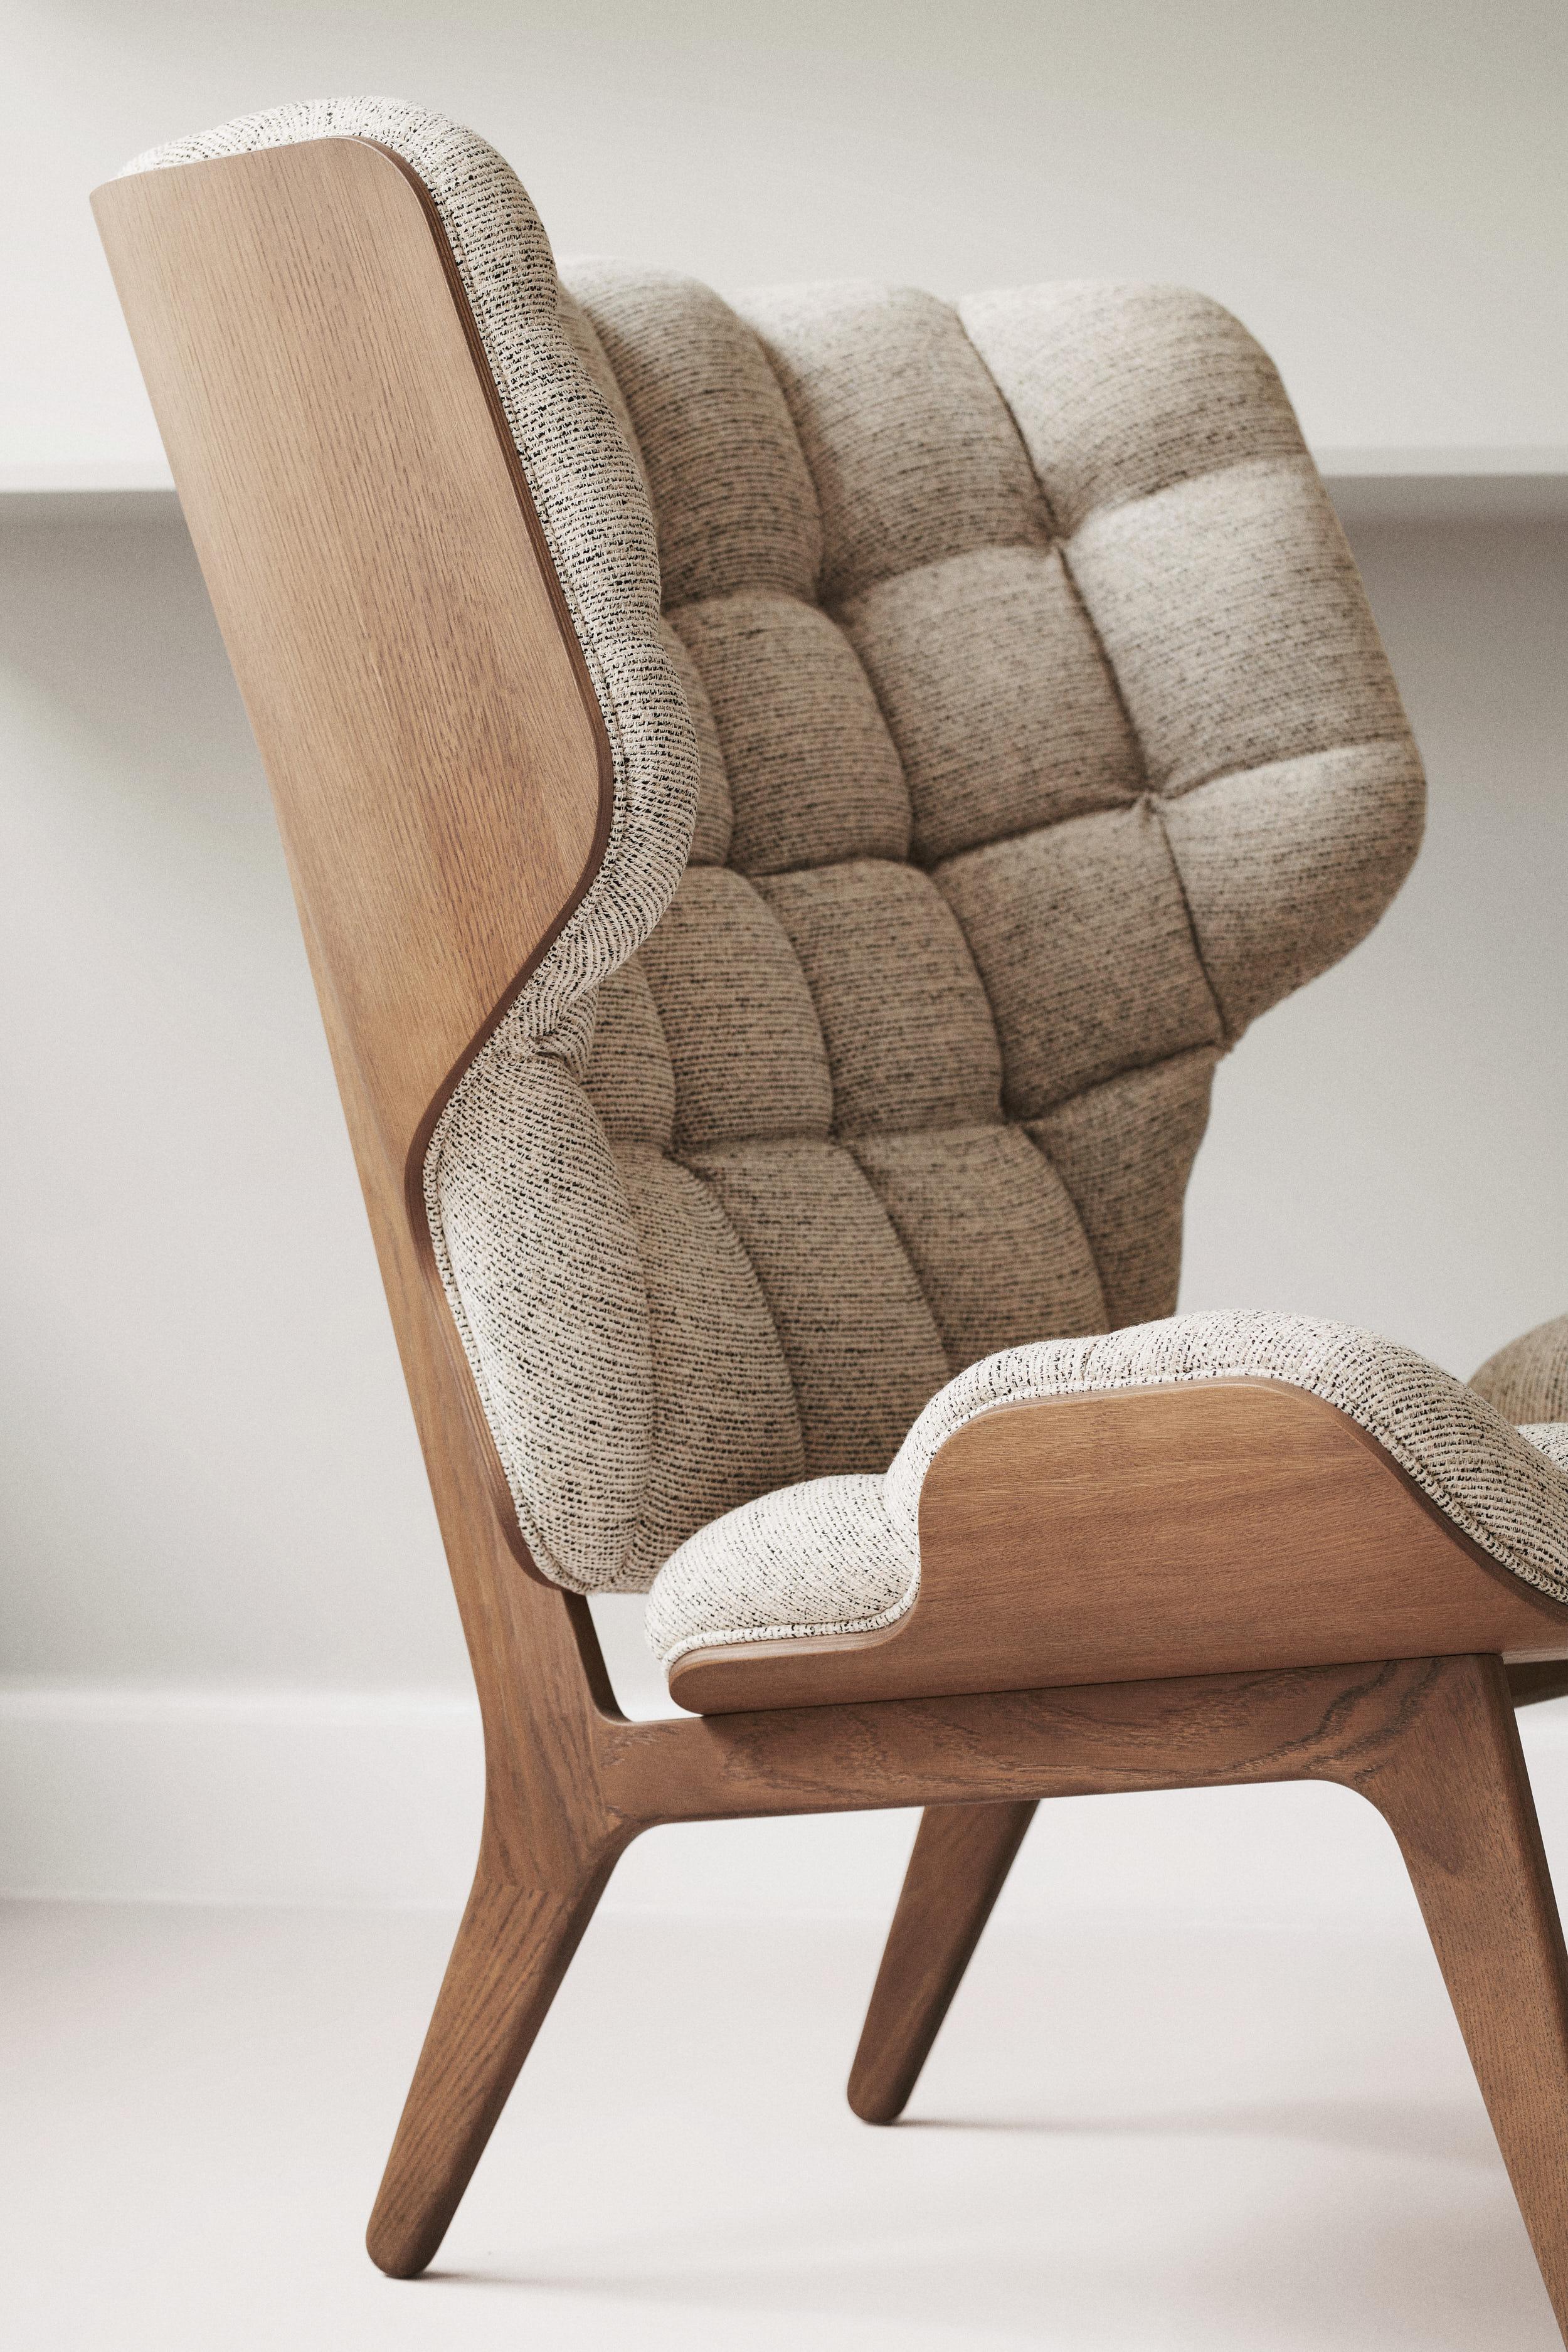 Wool Contemporary Set 'Mammoth', Chair + Ottoman, Light Smoked Oak, Fame For Sale